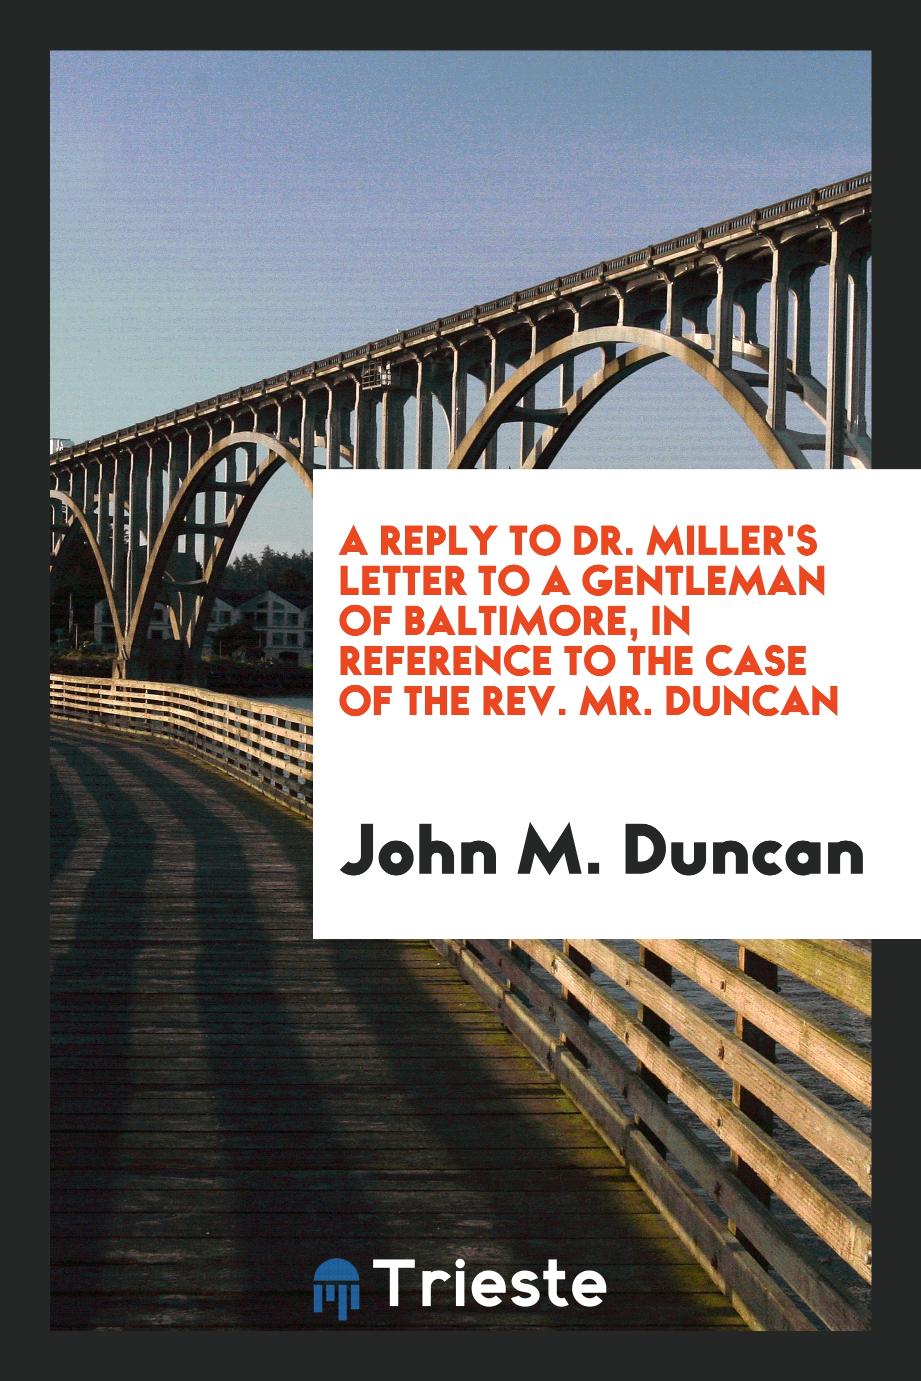 A Reply to Dr. Miller's Letter to a Gentleman of Baltimore, in Reference to the Case of the Rev. Mr. Duncan